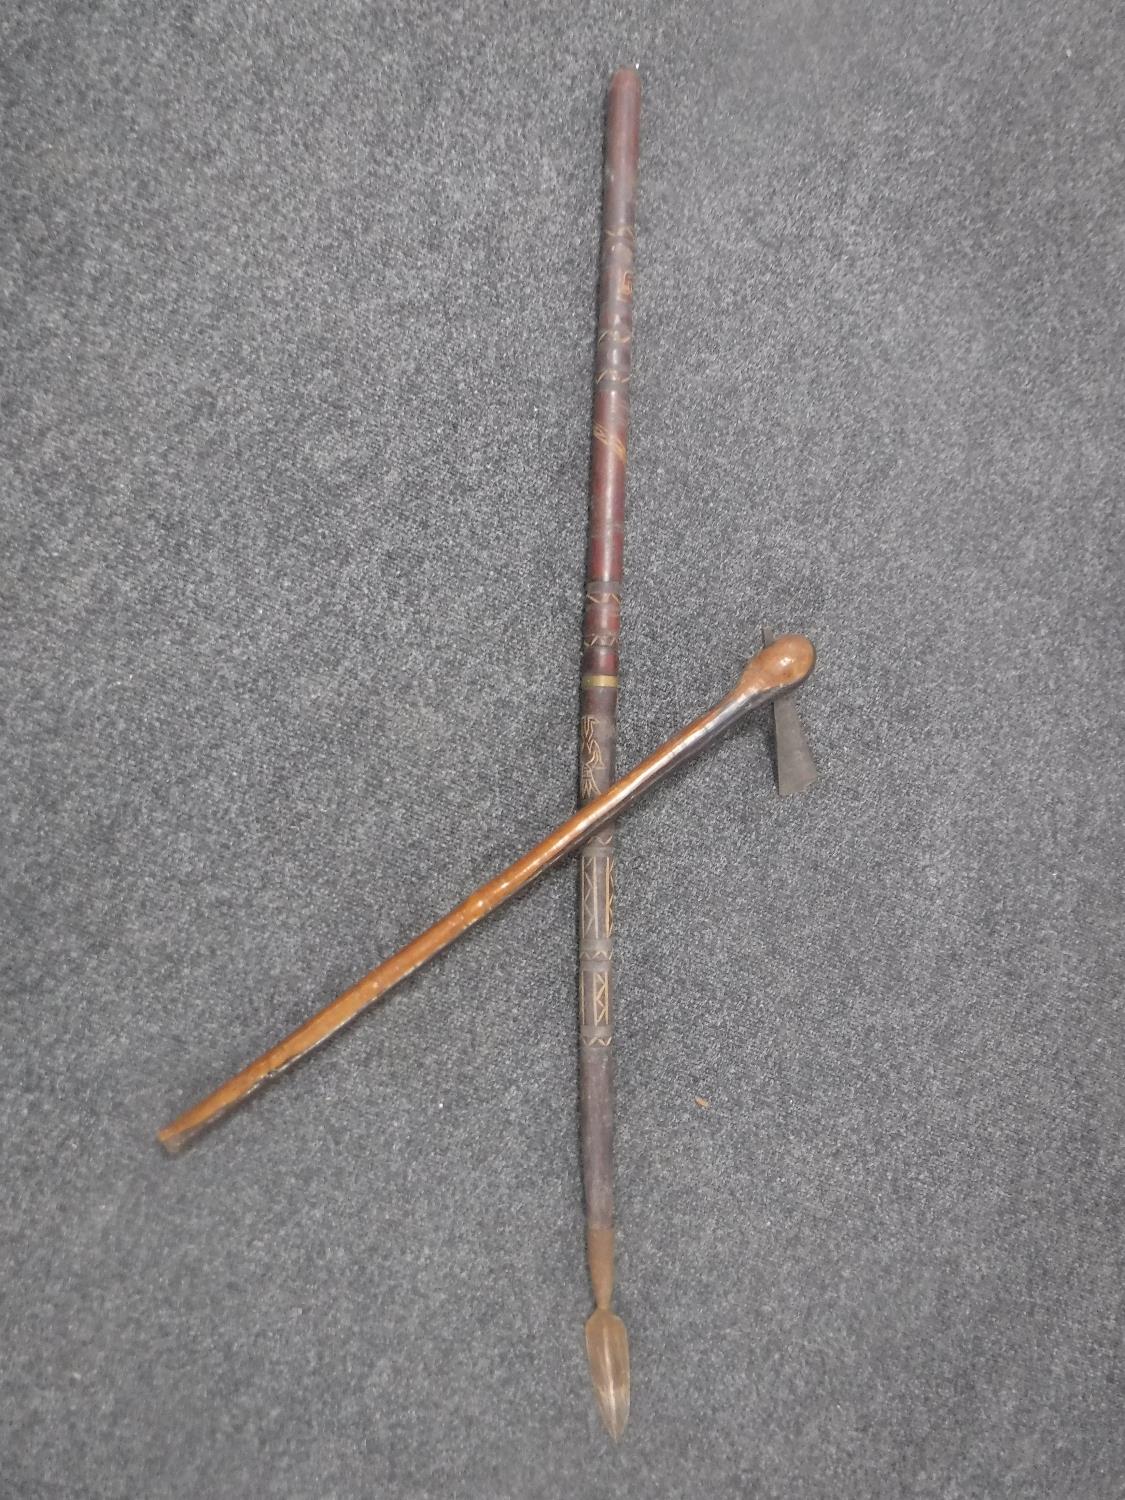 A tribal spear and axe